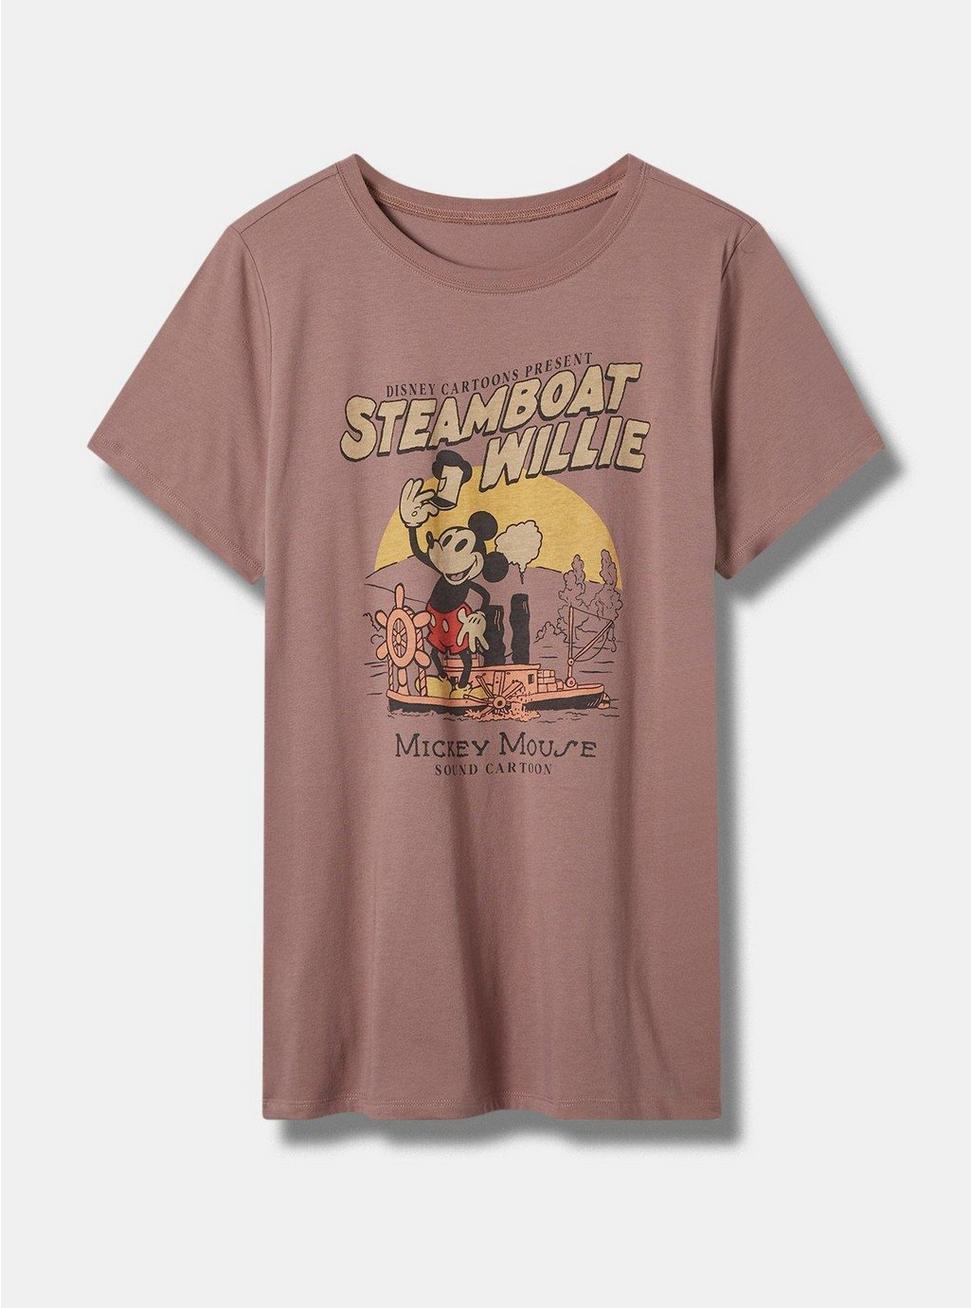 Plus Size Disney Steamboat Willie Classic Fit Crew Neck Top, BROWN, hi-res